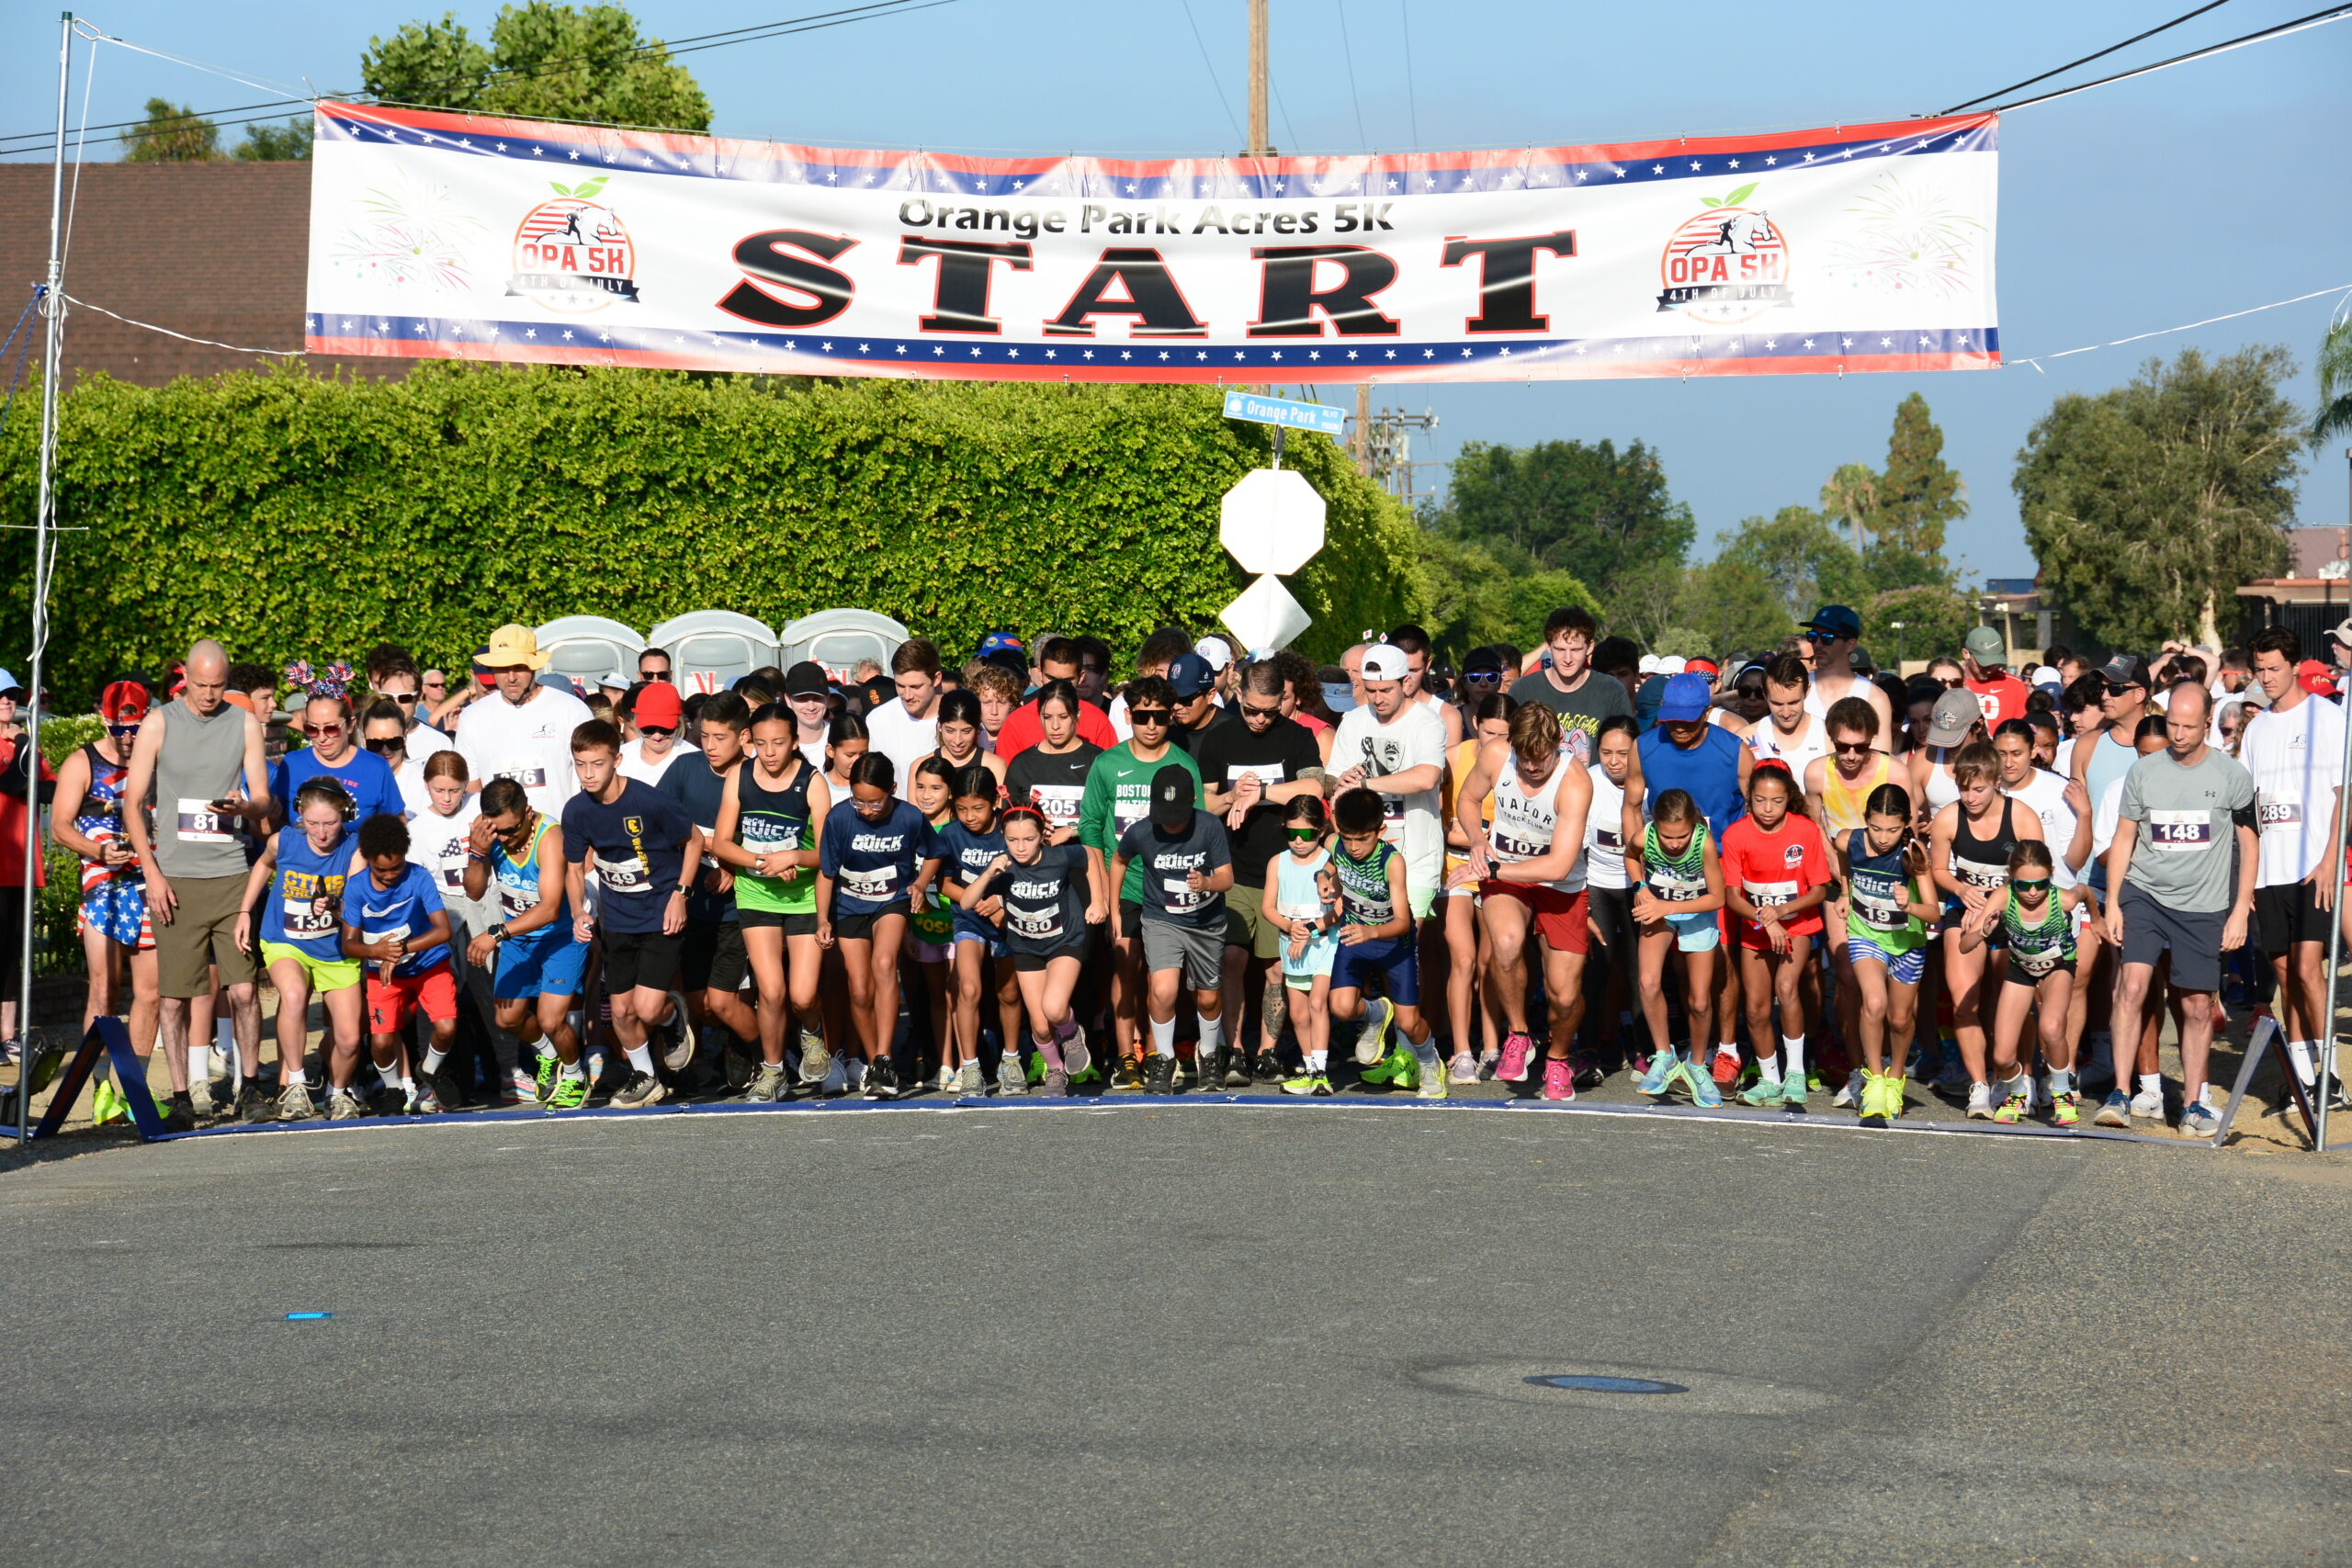 STart of the top july 4 5k orange county event